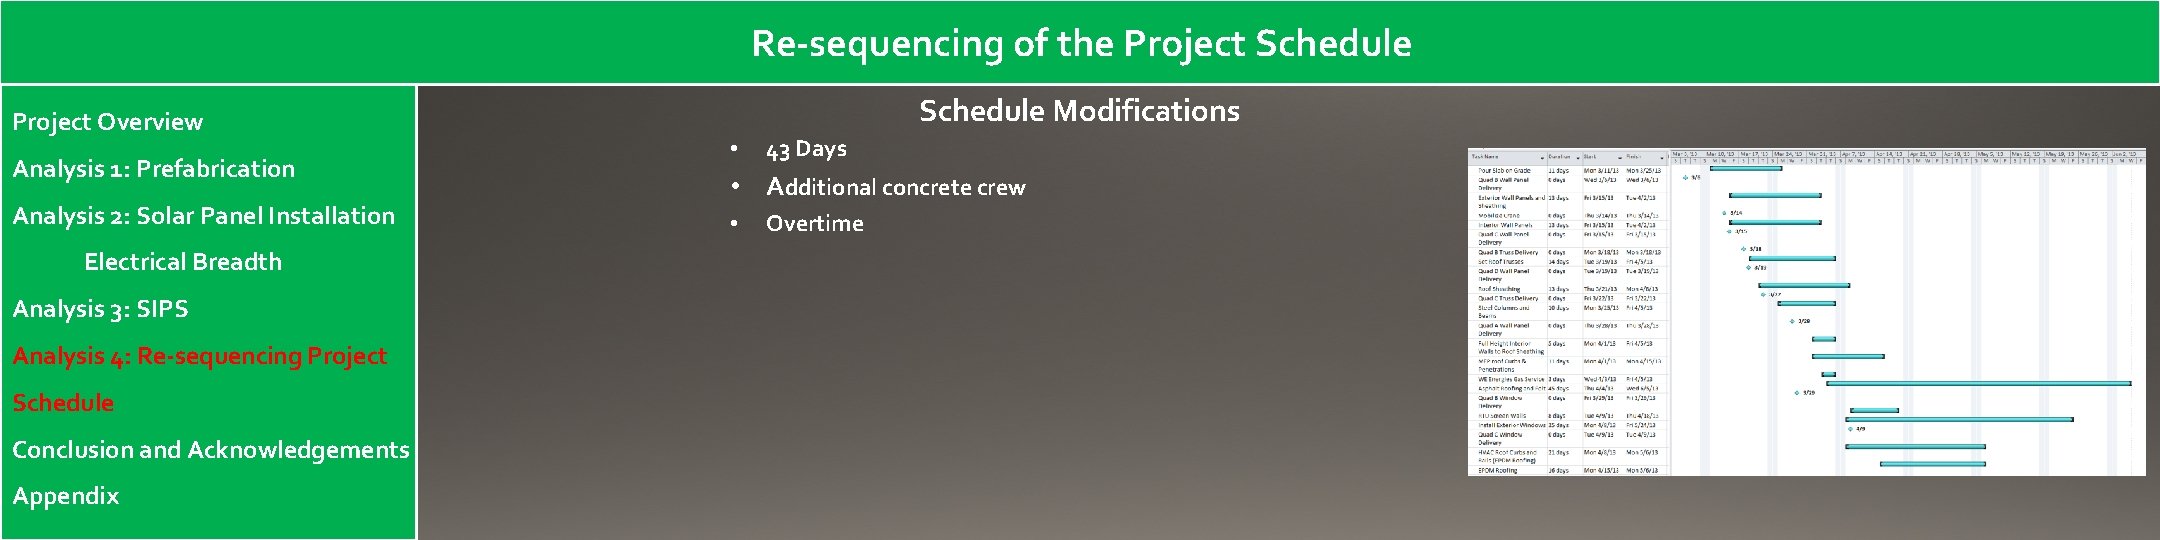 Re-sequencing of the Project Schedule Project Overview Analysis 1: Prefabrication Analysis 2: Solar Panel